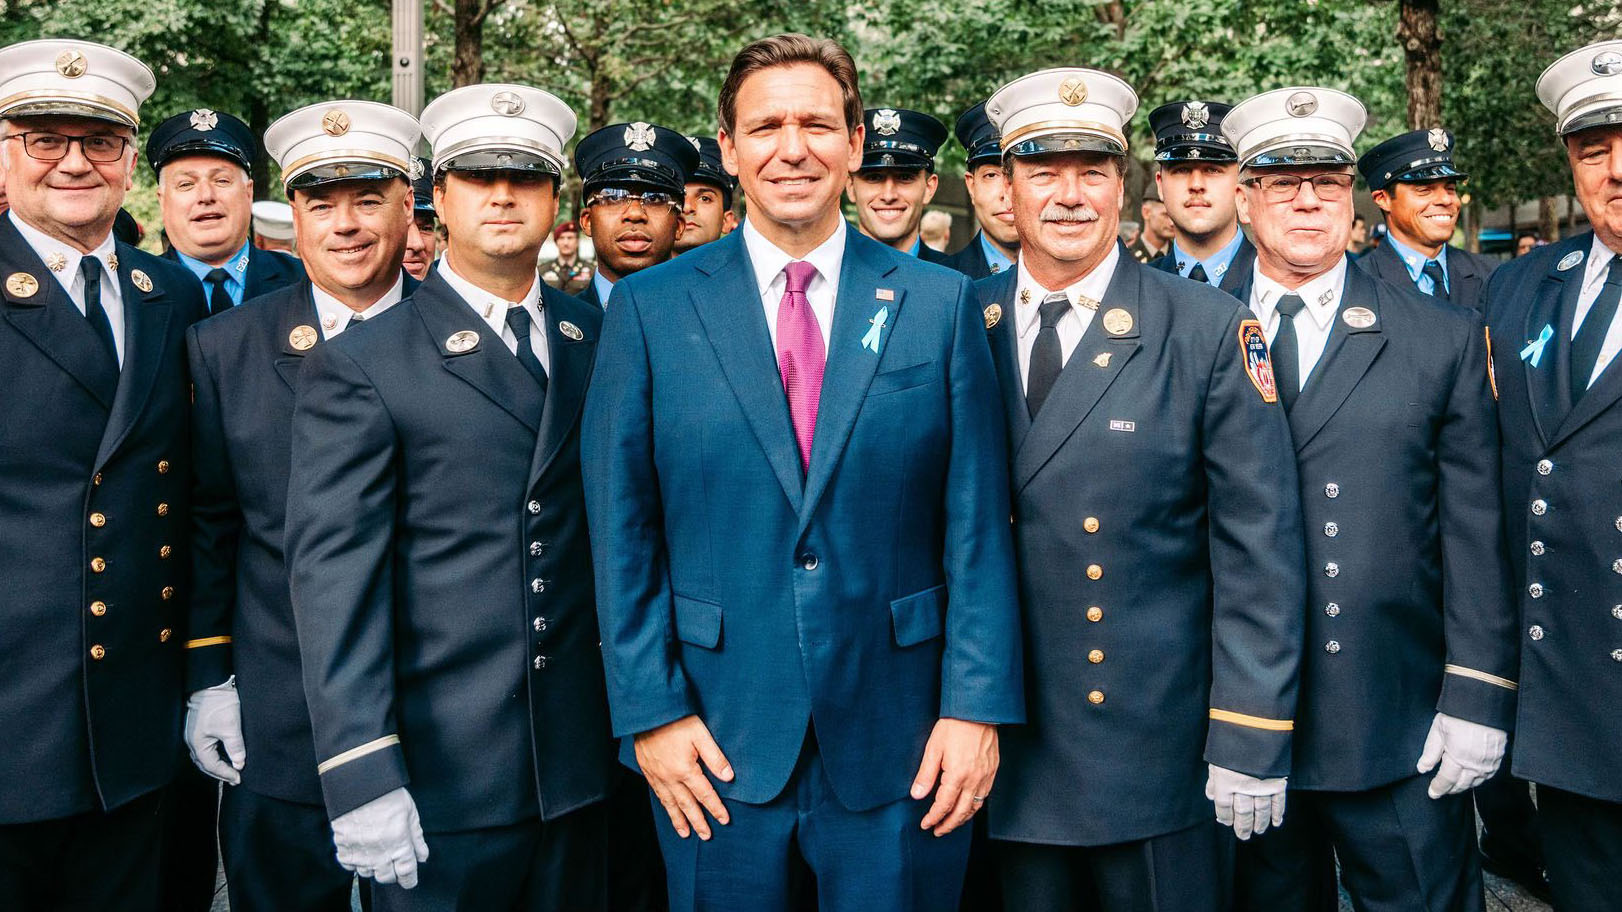 DeSantis meets 9/11 families, seeks transparency and accountability for victims at Ground Zero.